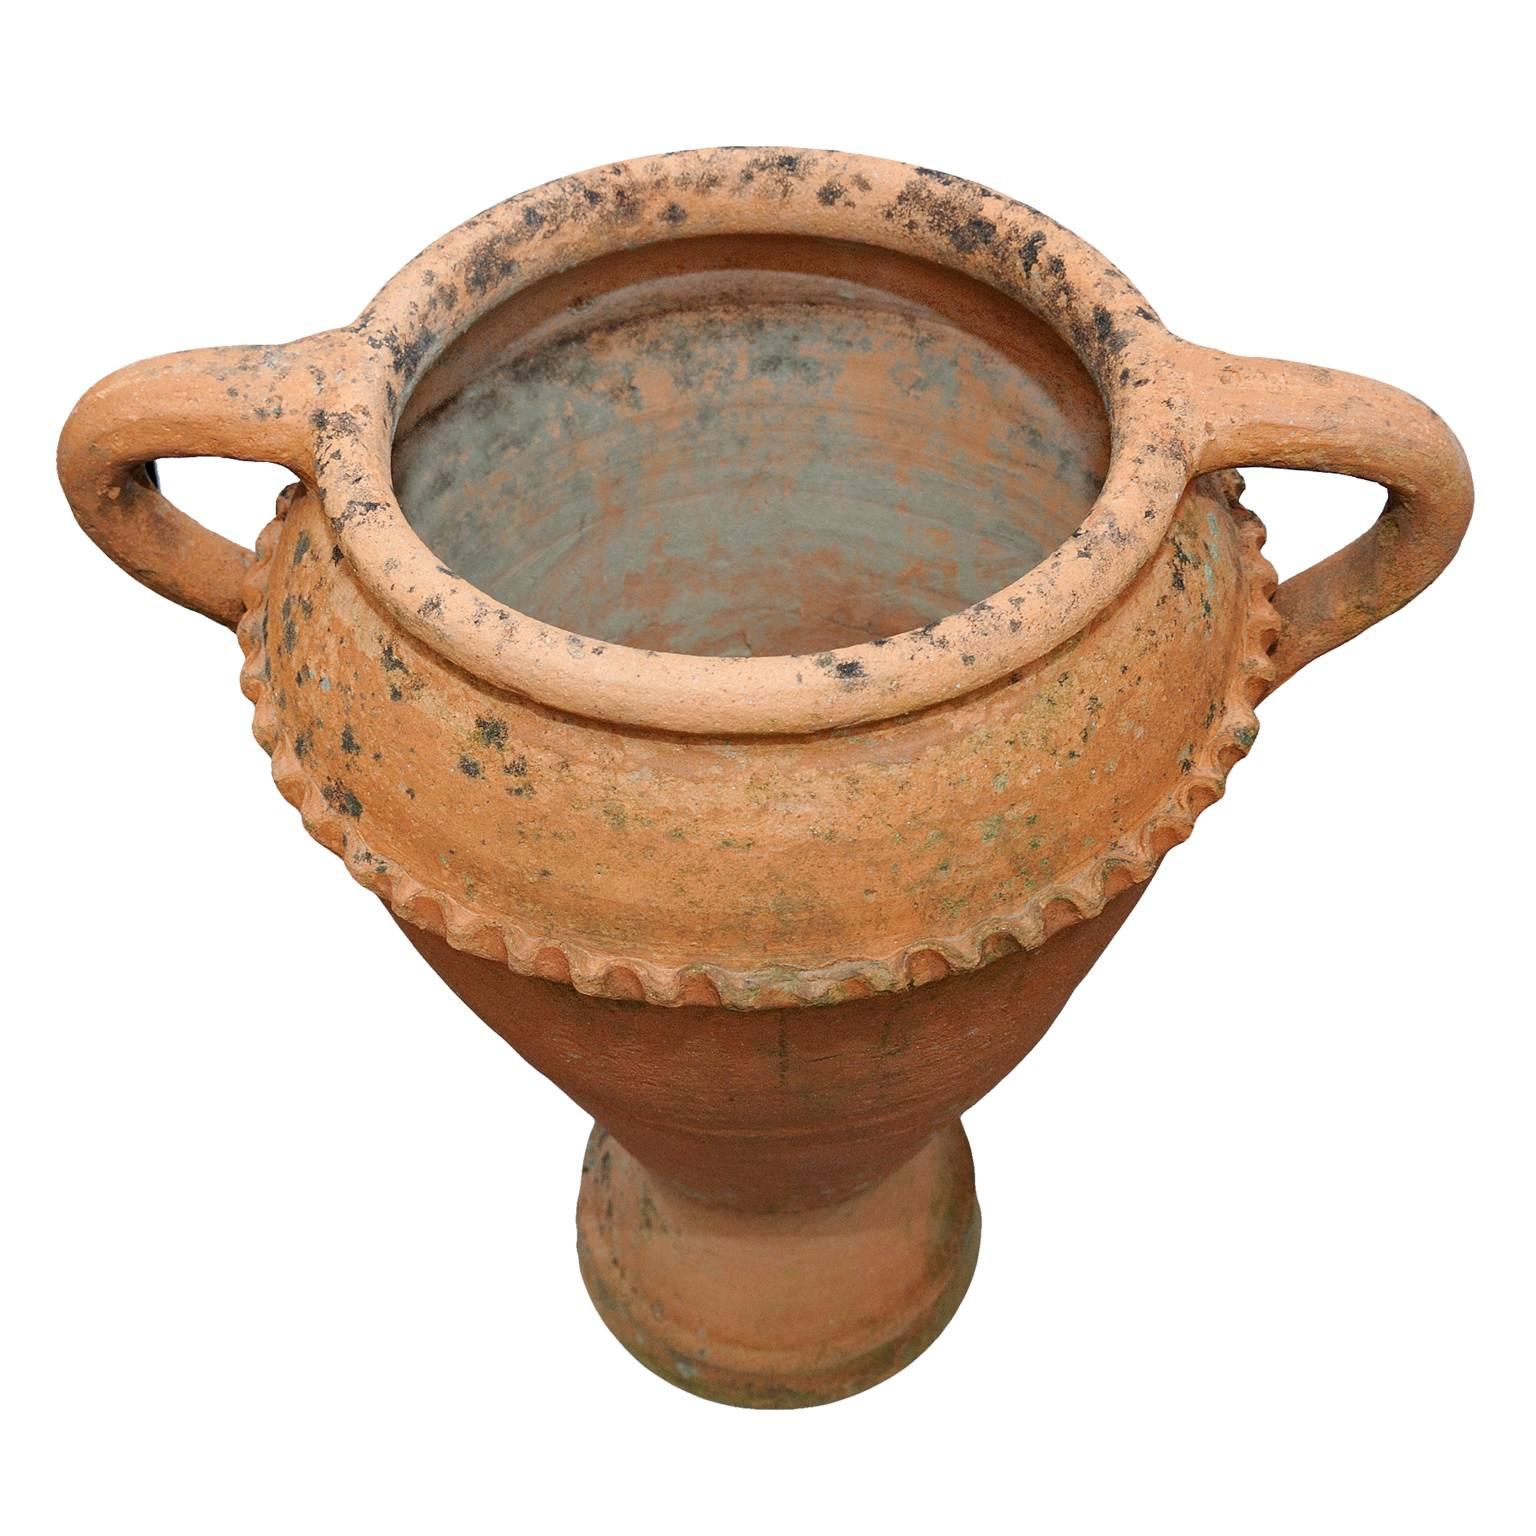 This is a large and quite beautiful late 19th century Greco/Roman style Terracotta Olive Jar. It could potentially be converted into a very stylish lamp, circa 1880.